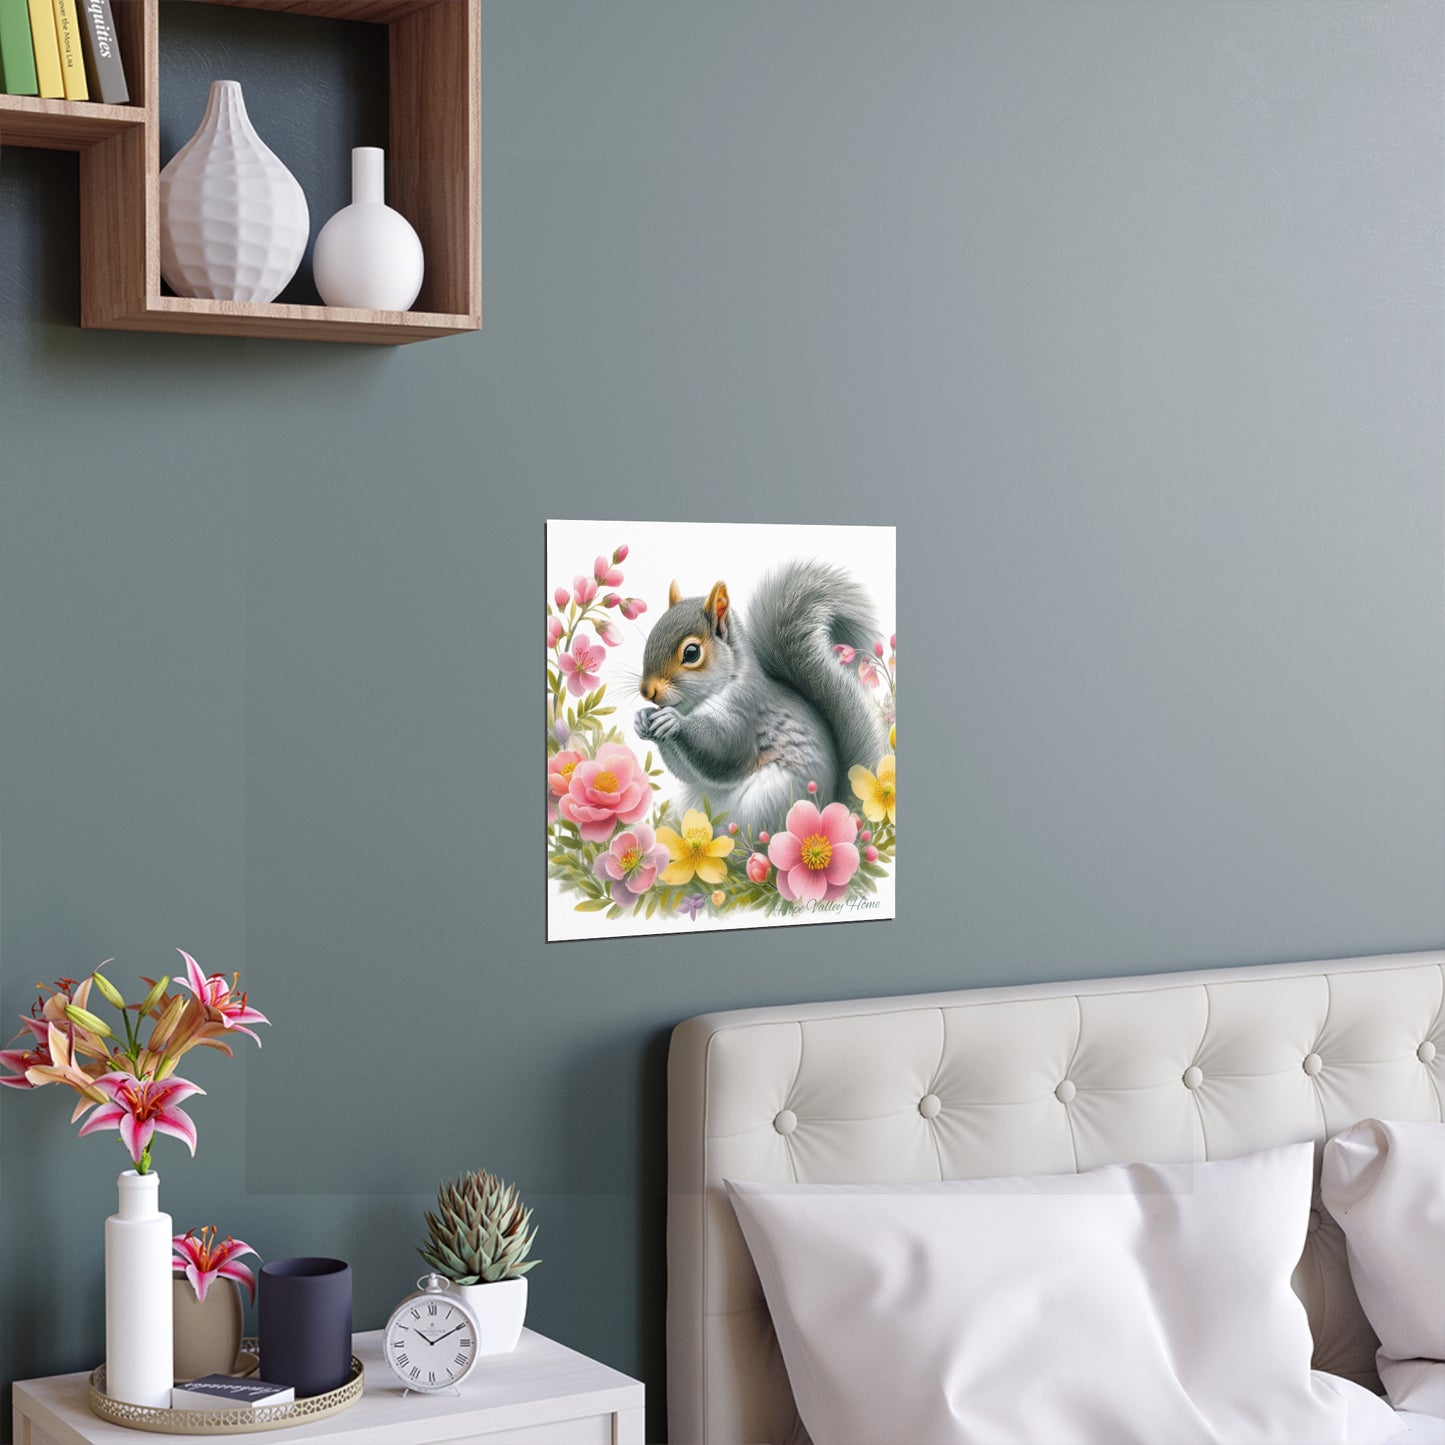 Squirrel Poster